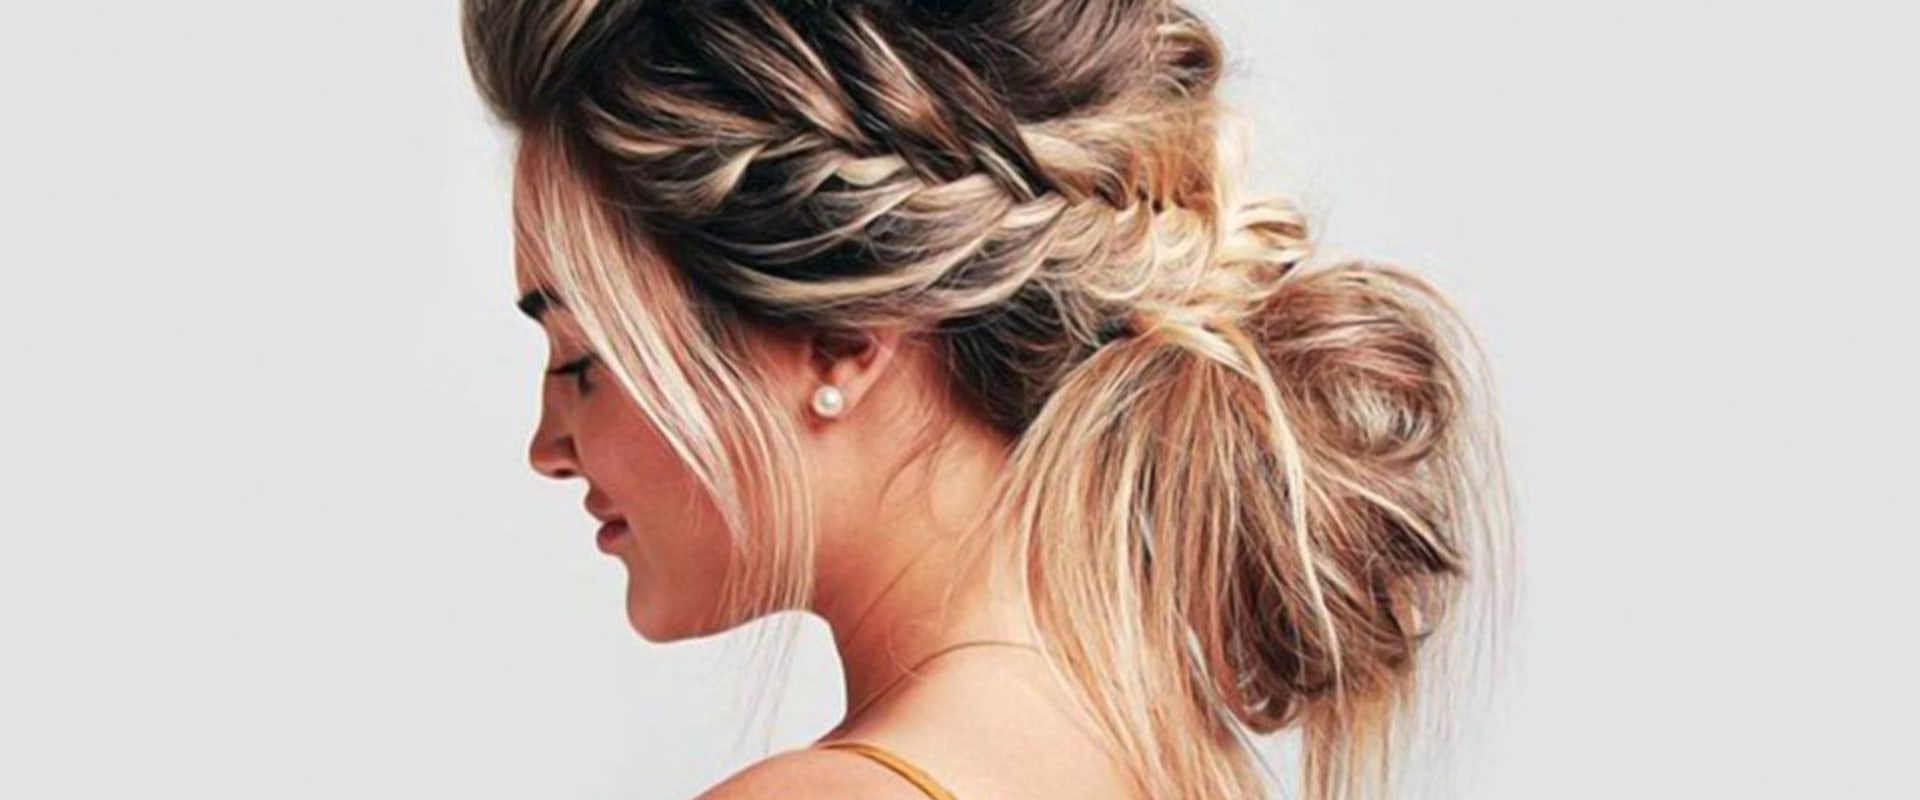 Creating Updos with Hair Extensions: A Styling Tips and Tricks Guide